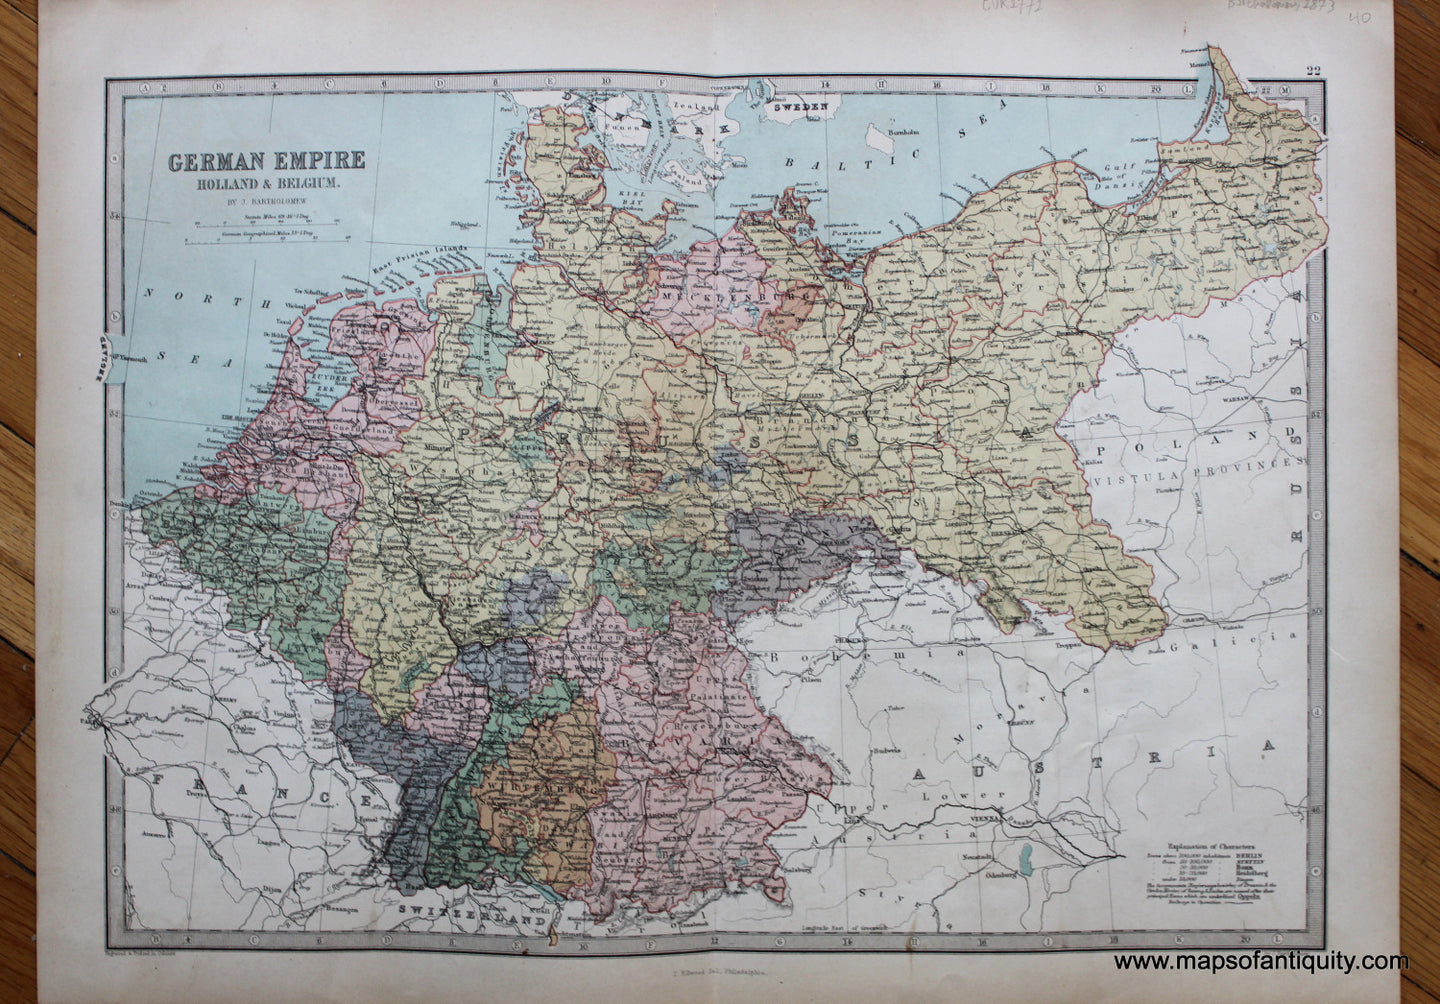 Antique-Printed-Color-Map-German-Empire-Holland-&-Belgium-**********-Europe-Germany-Holland-&-The-Netherlands-1873-J.-Bartholomew-Maps-Of-Antiquity